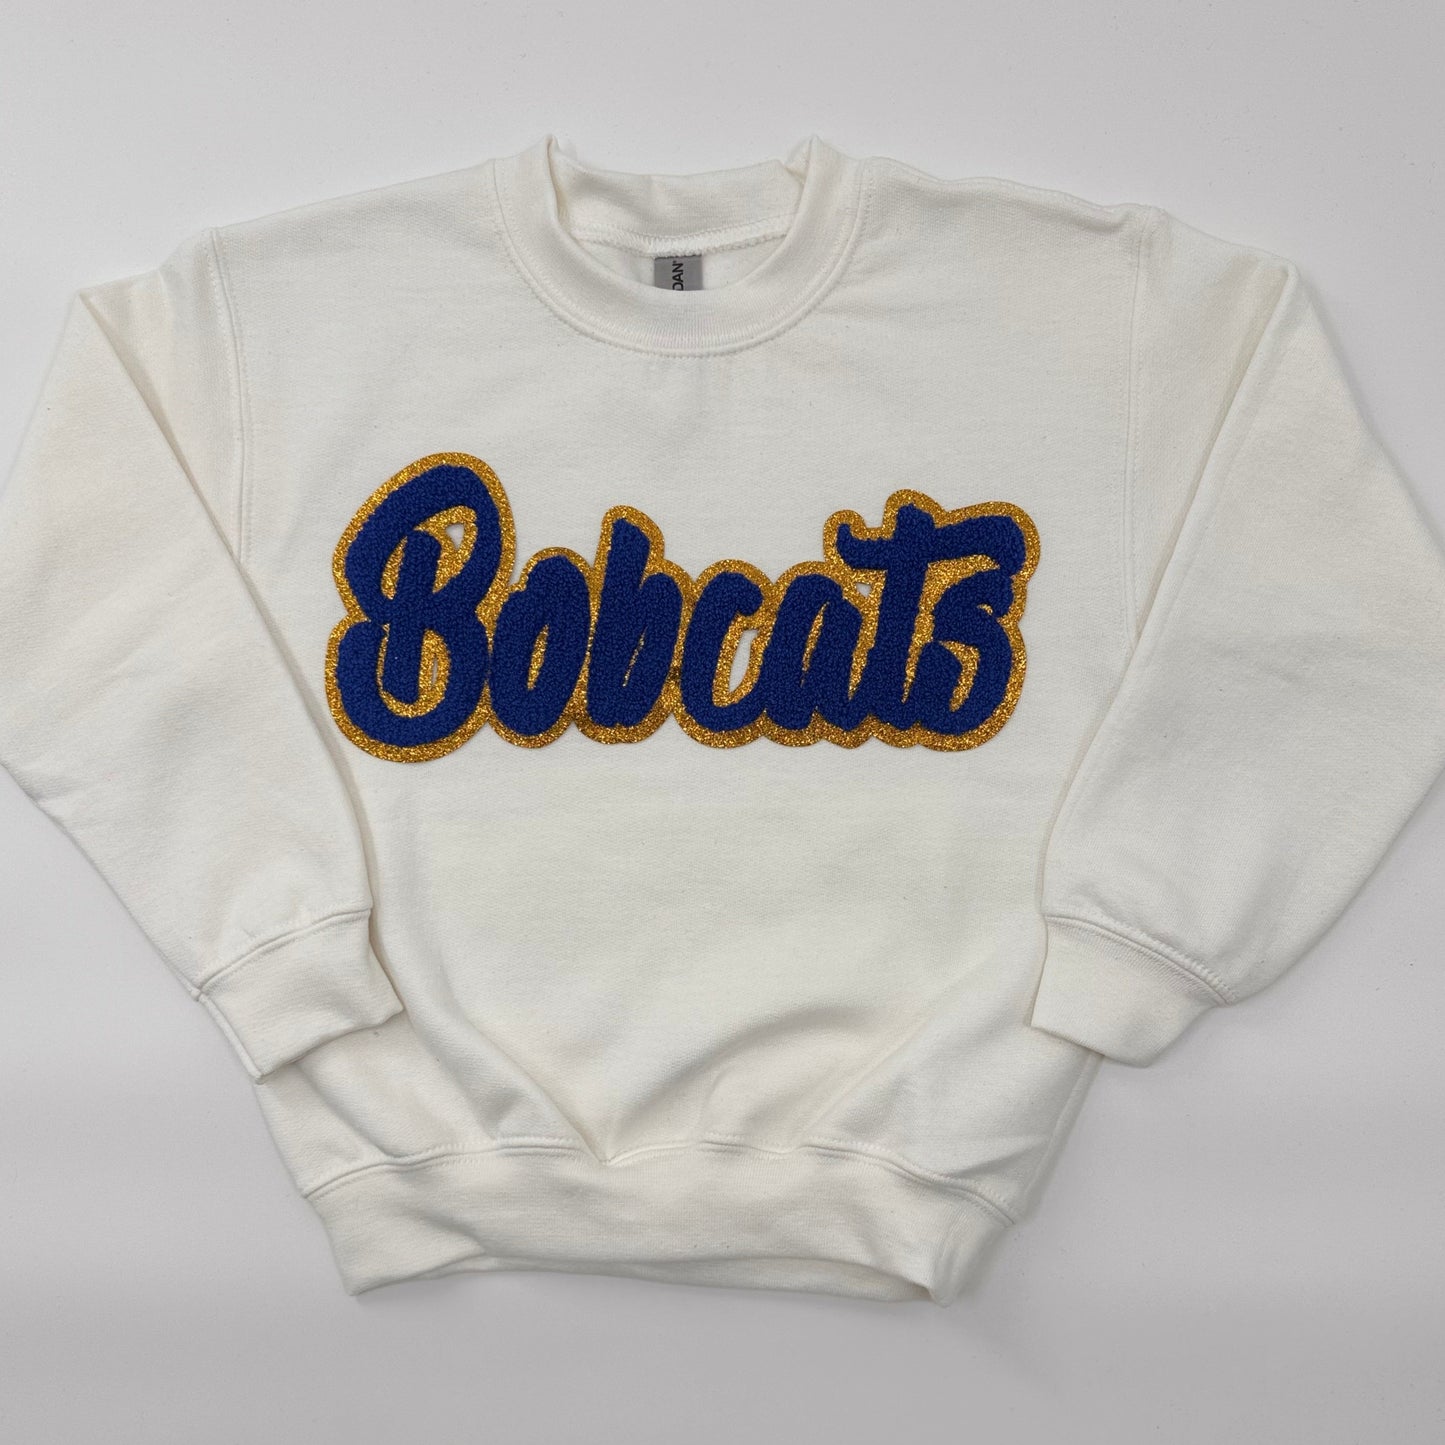 Bobcats Chenille Patch in a Women's UNISEX Crewneck (see pictures for Sweatshirt Style)